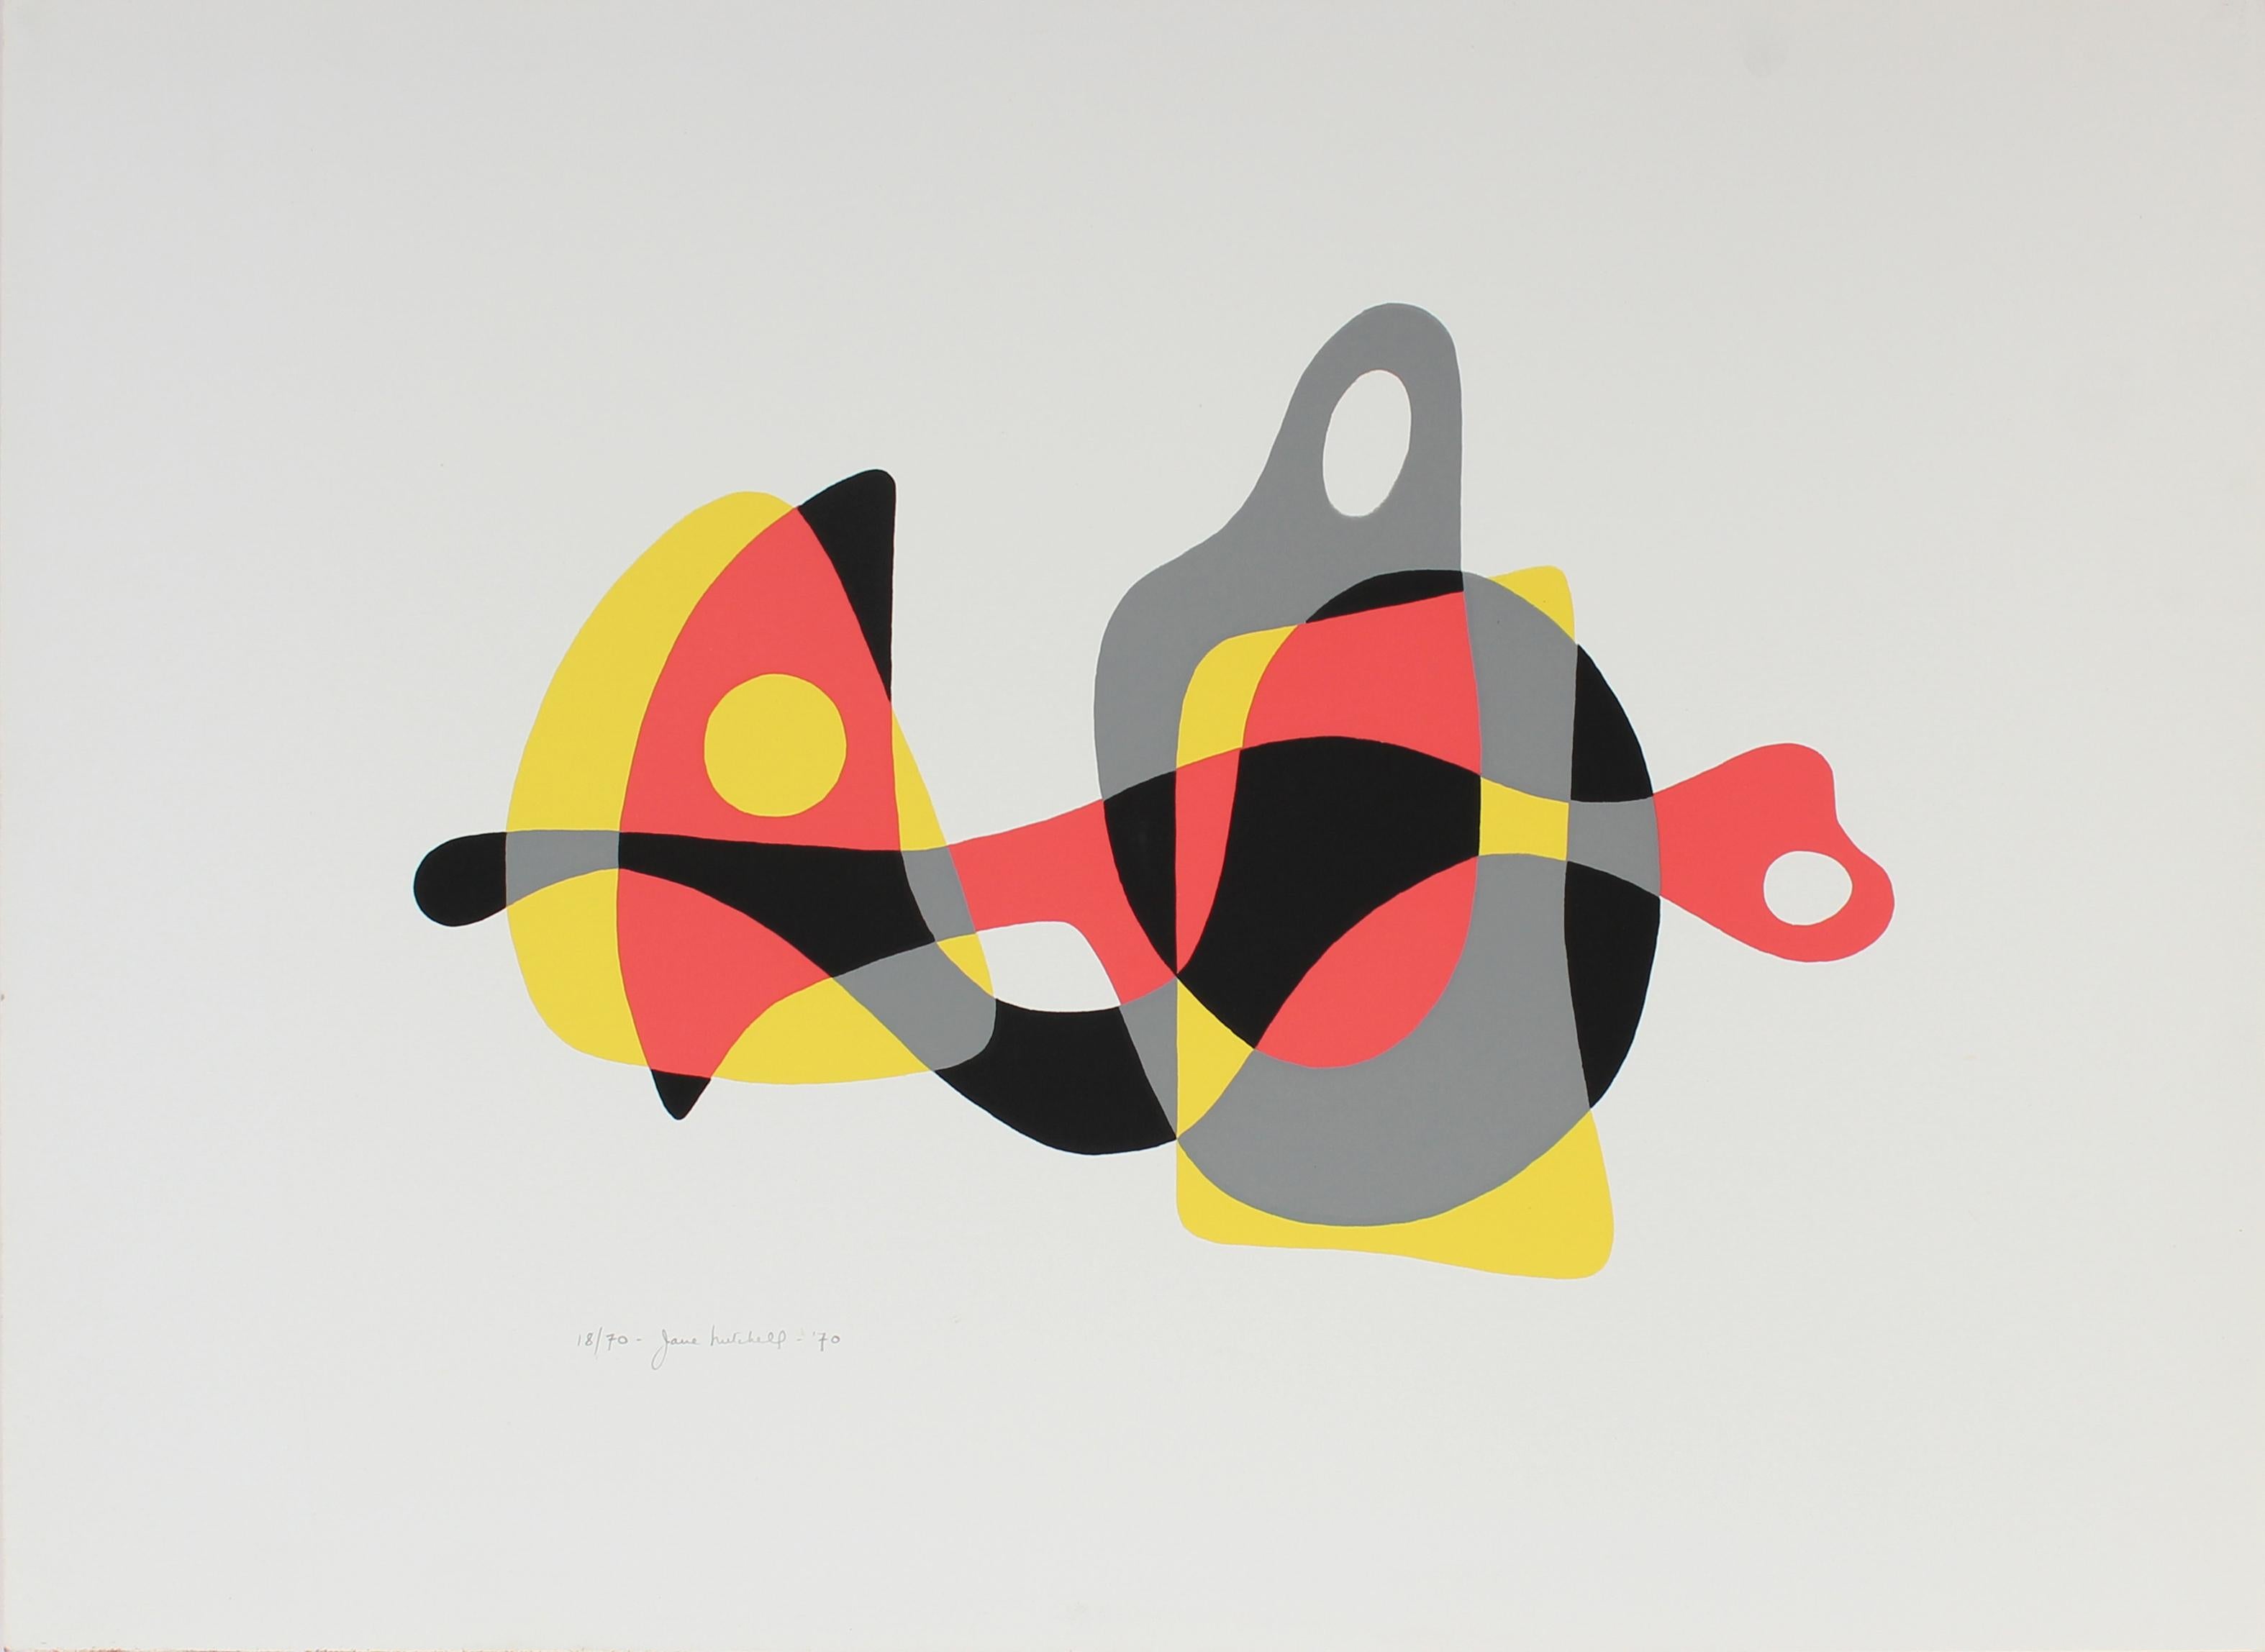 Modernist Abstracted Serigraph, 1970 - Print by Jane Mitchell